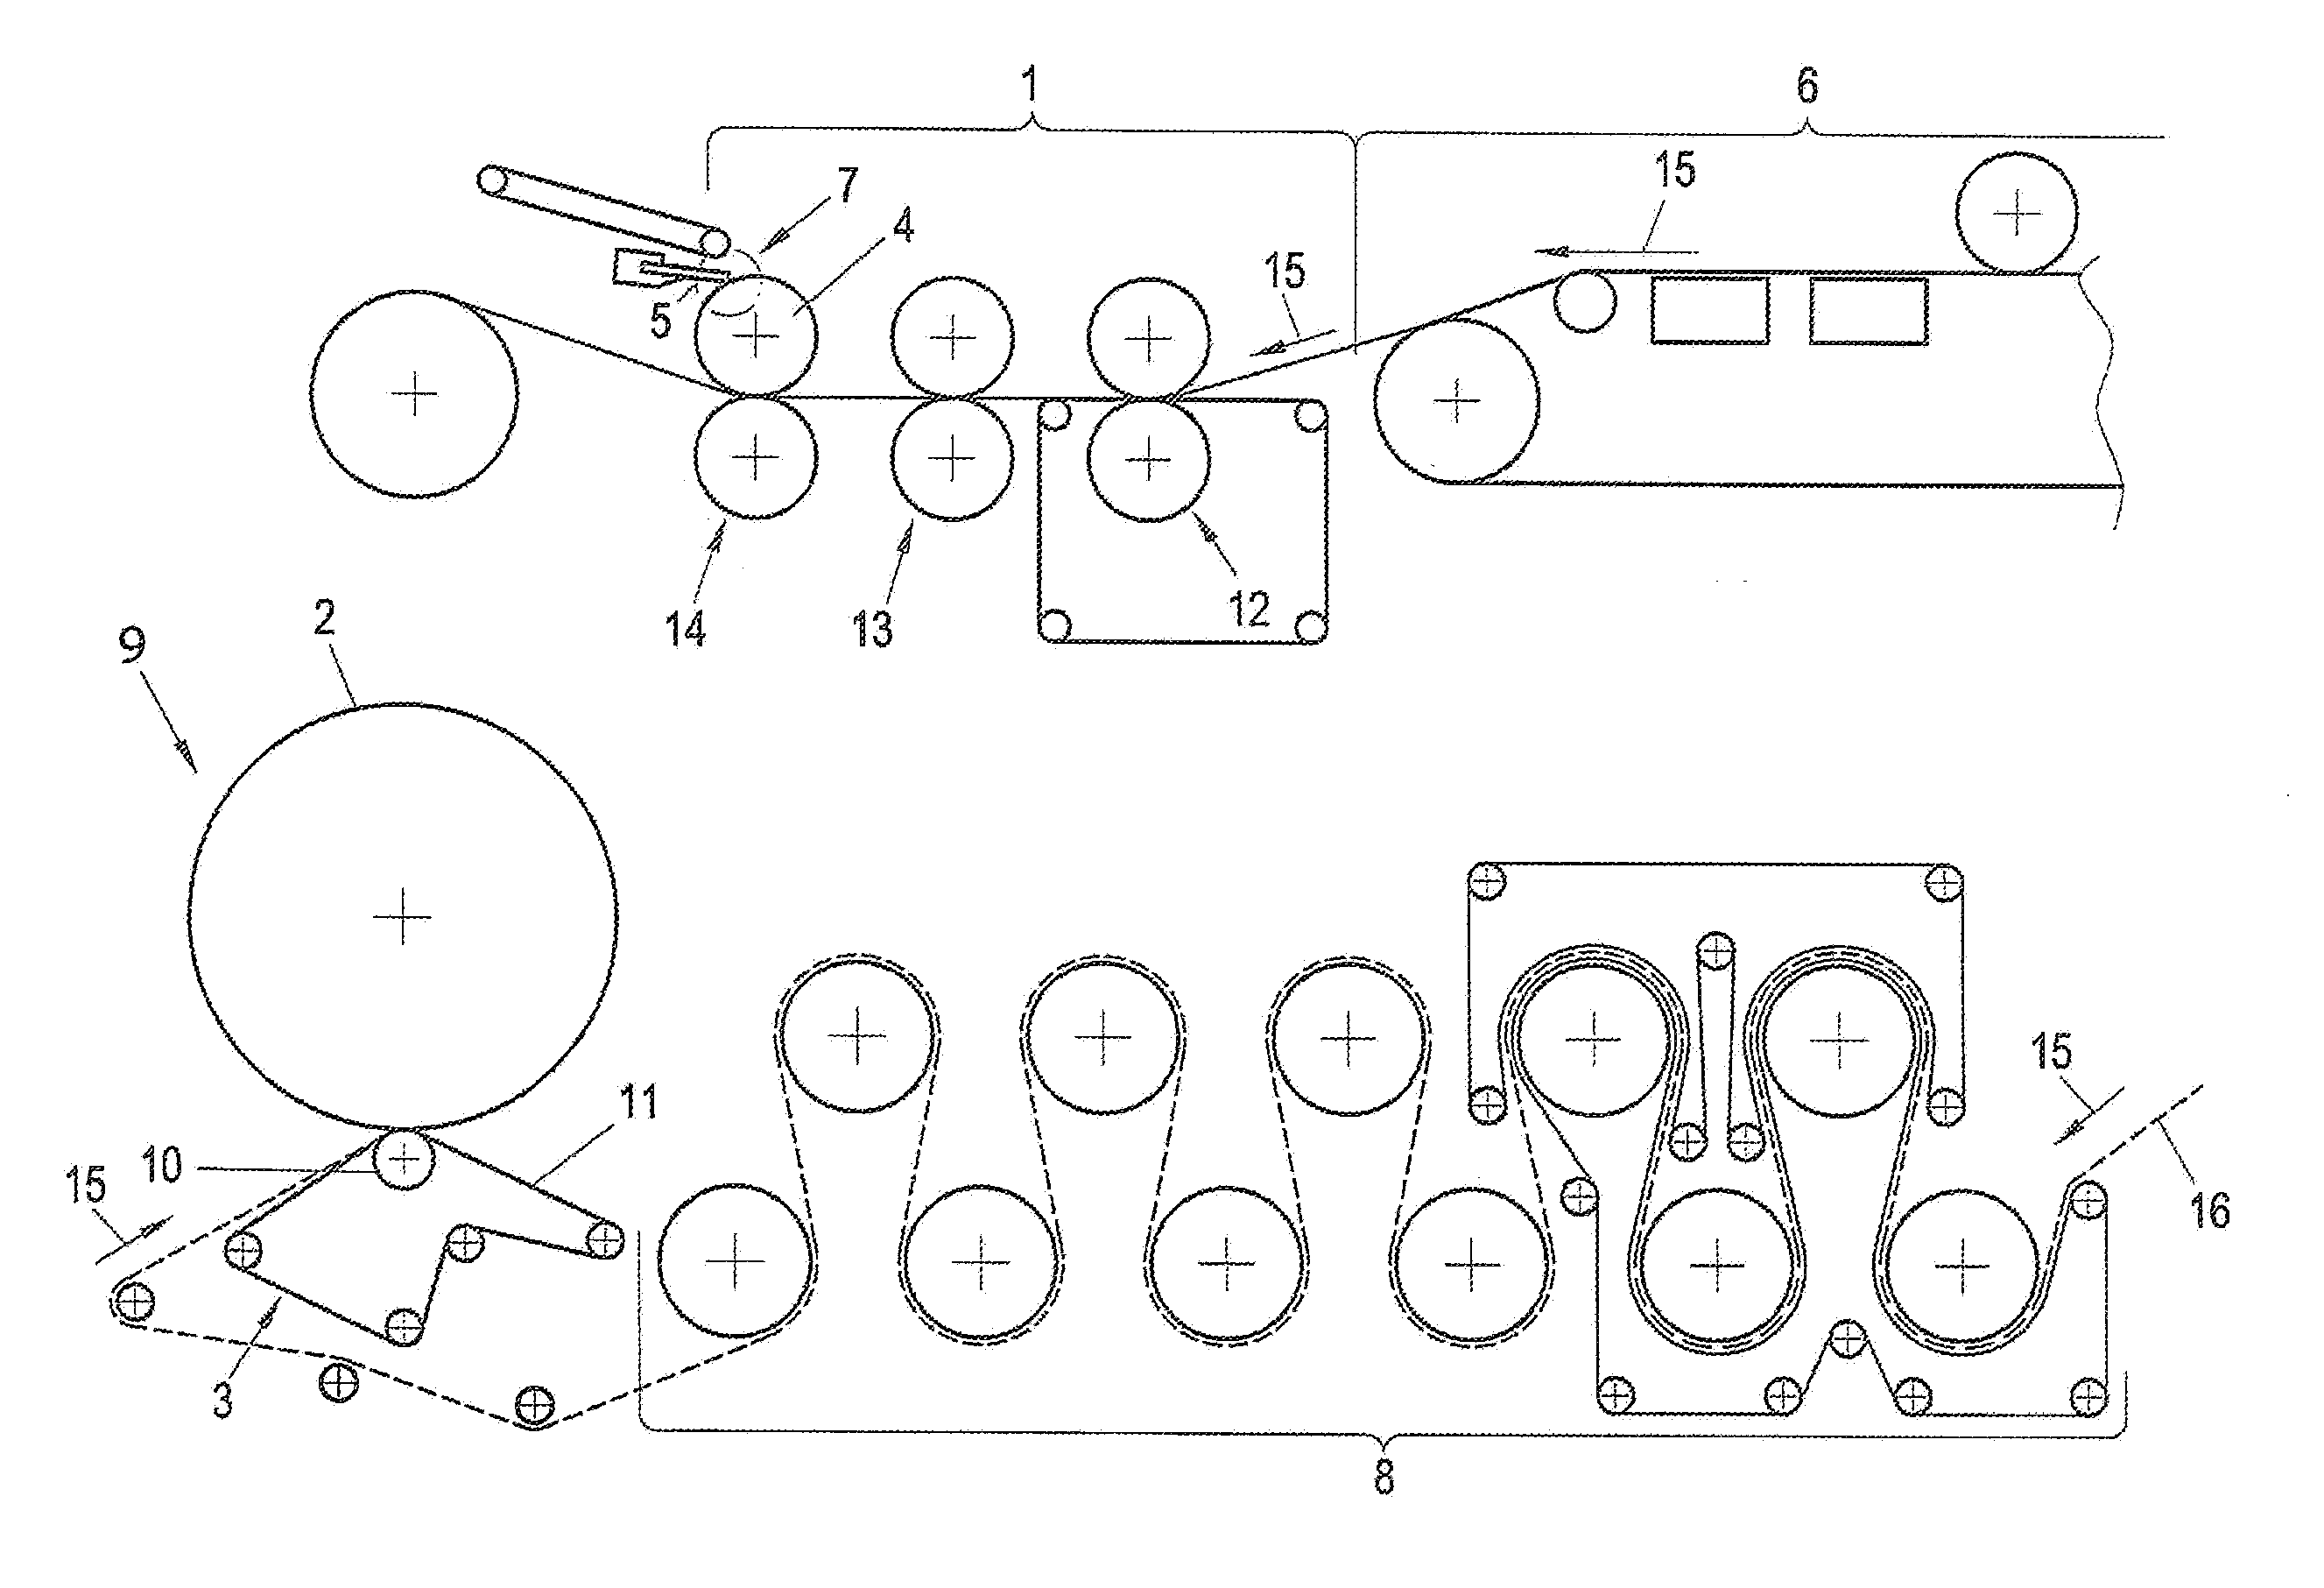 Method for producing crepe paper that is smooth on one side